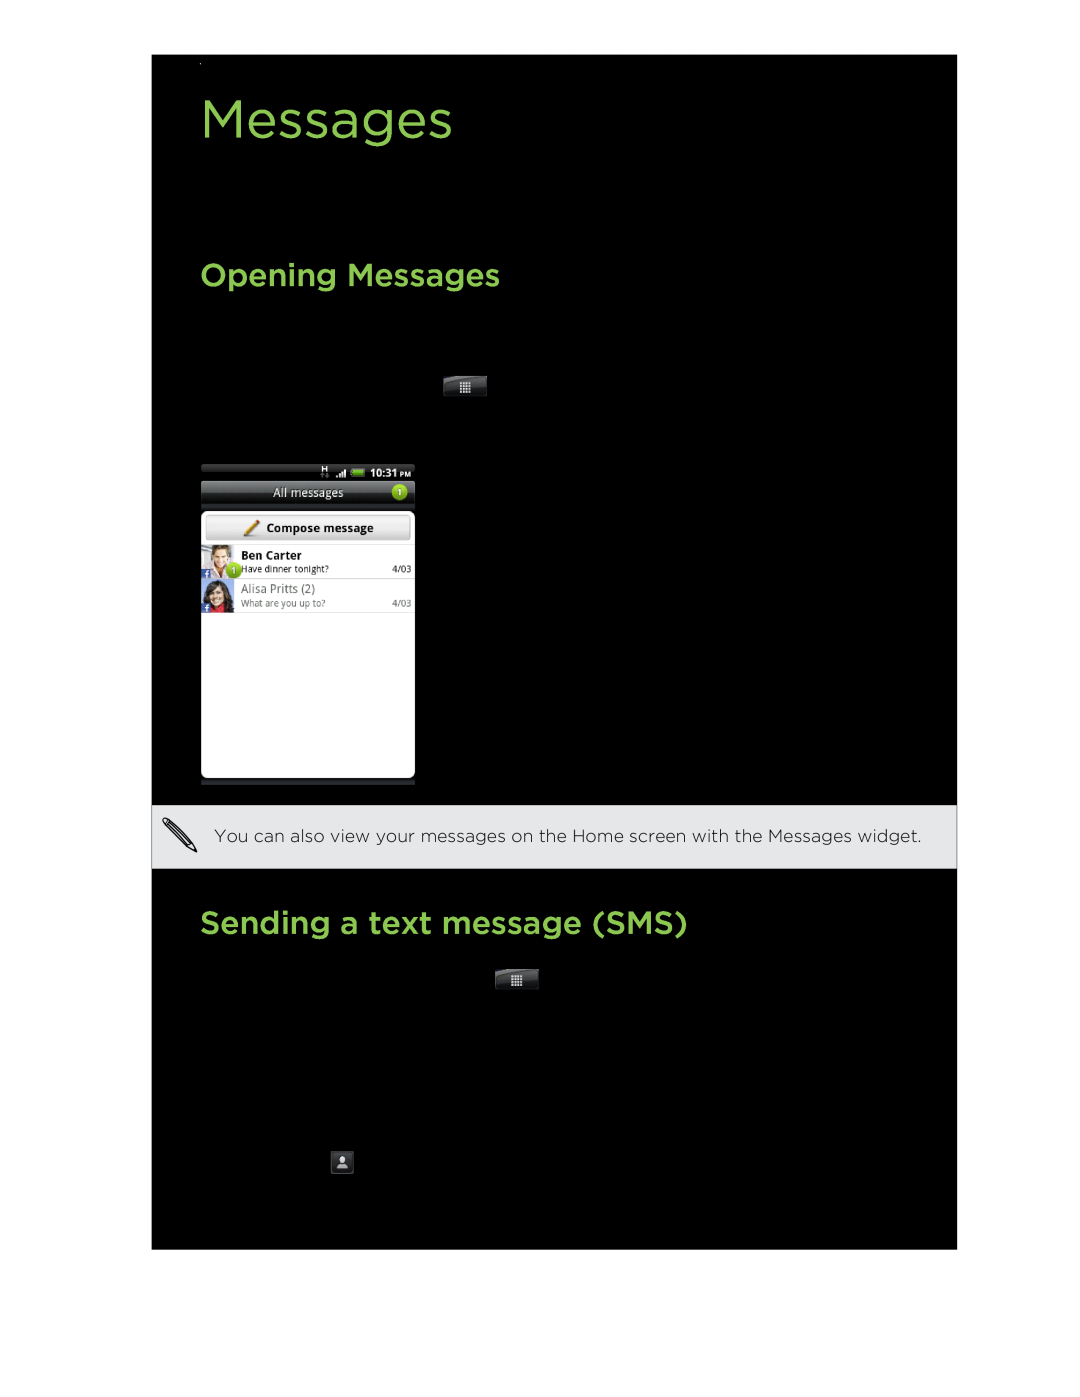 HTC manual Opening Messages, Sending a text message SMS 